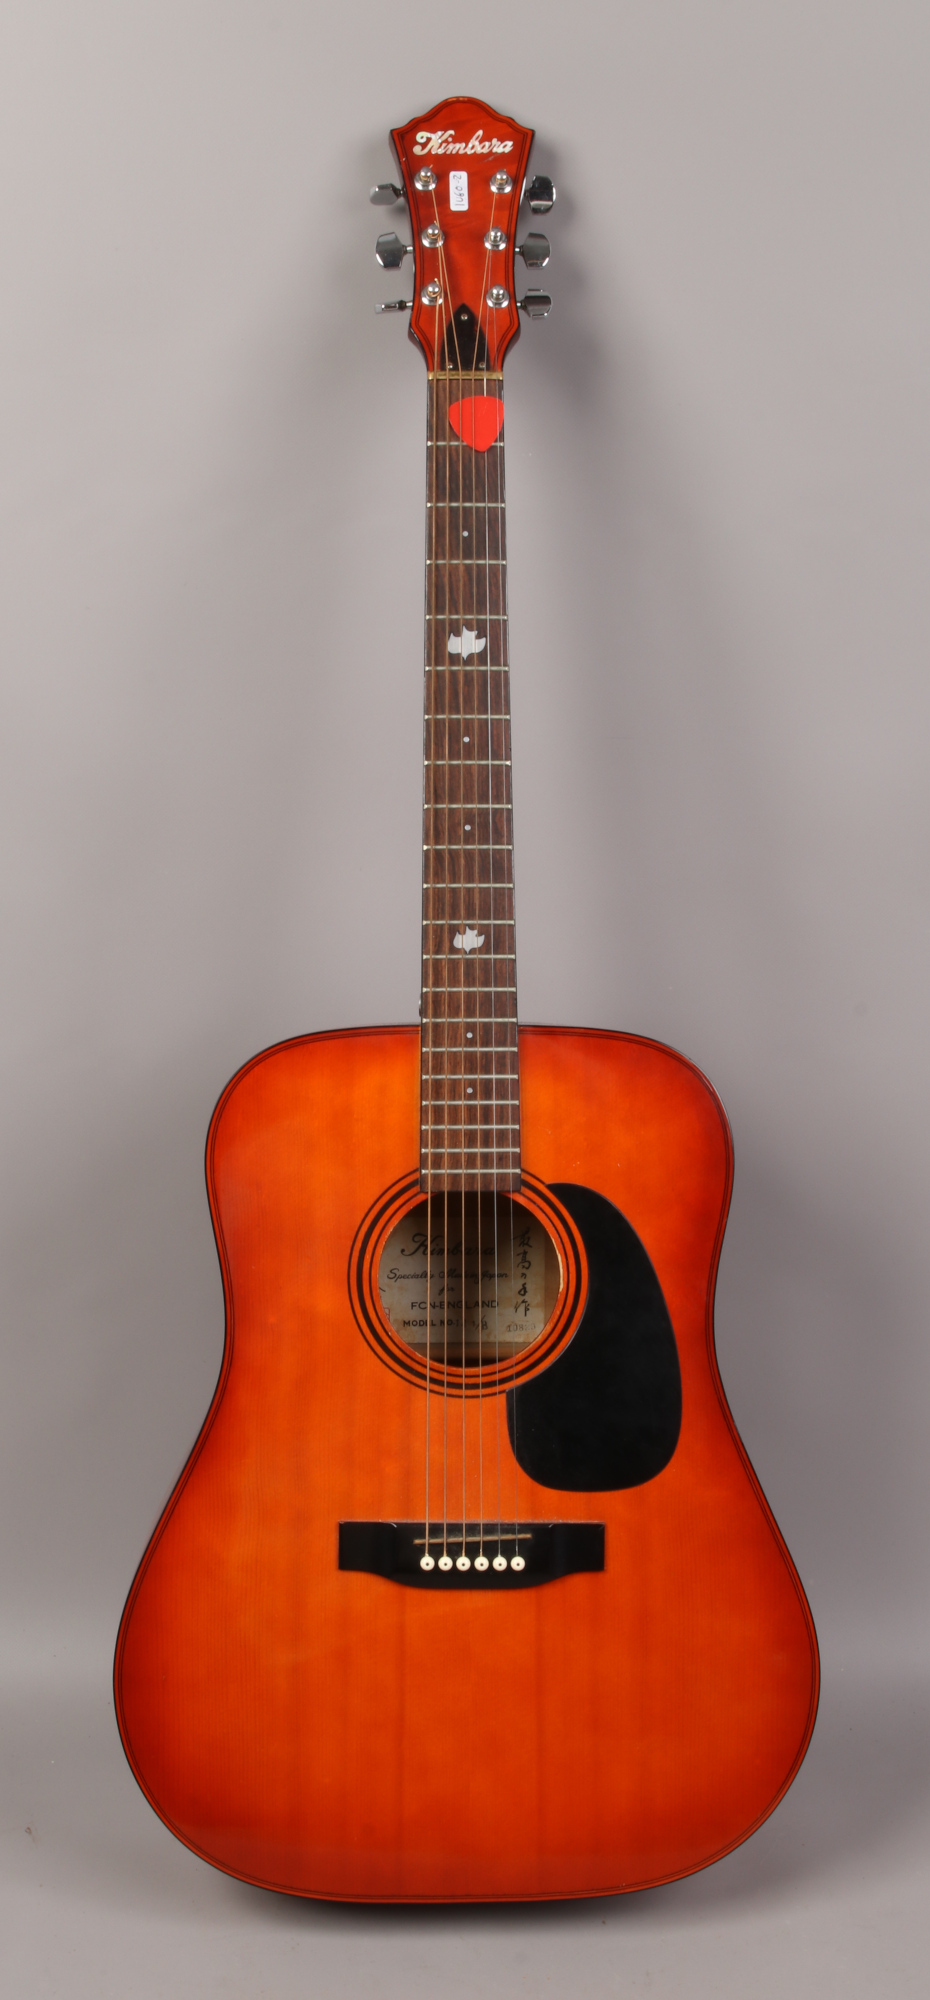 A Japanese made Kimbara acoustic guitar, model 141 / B in Stagg carry bag.